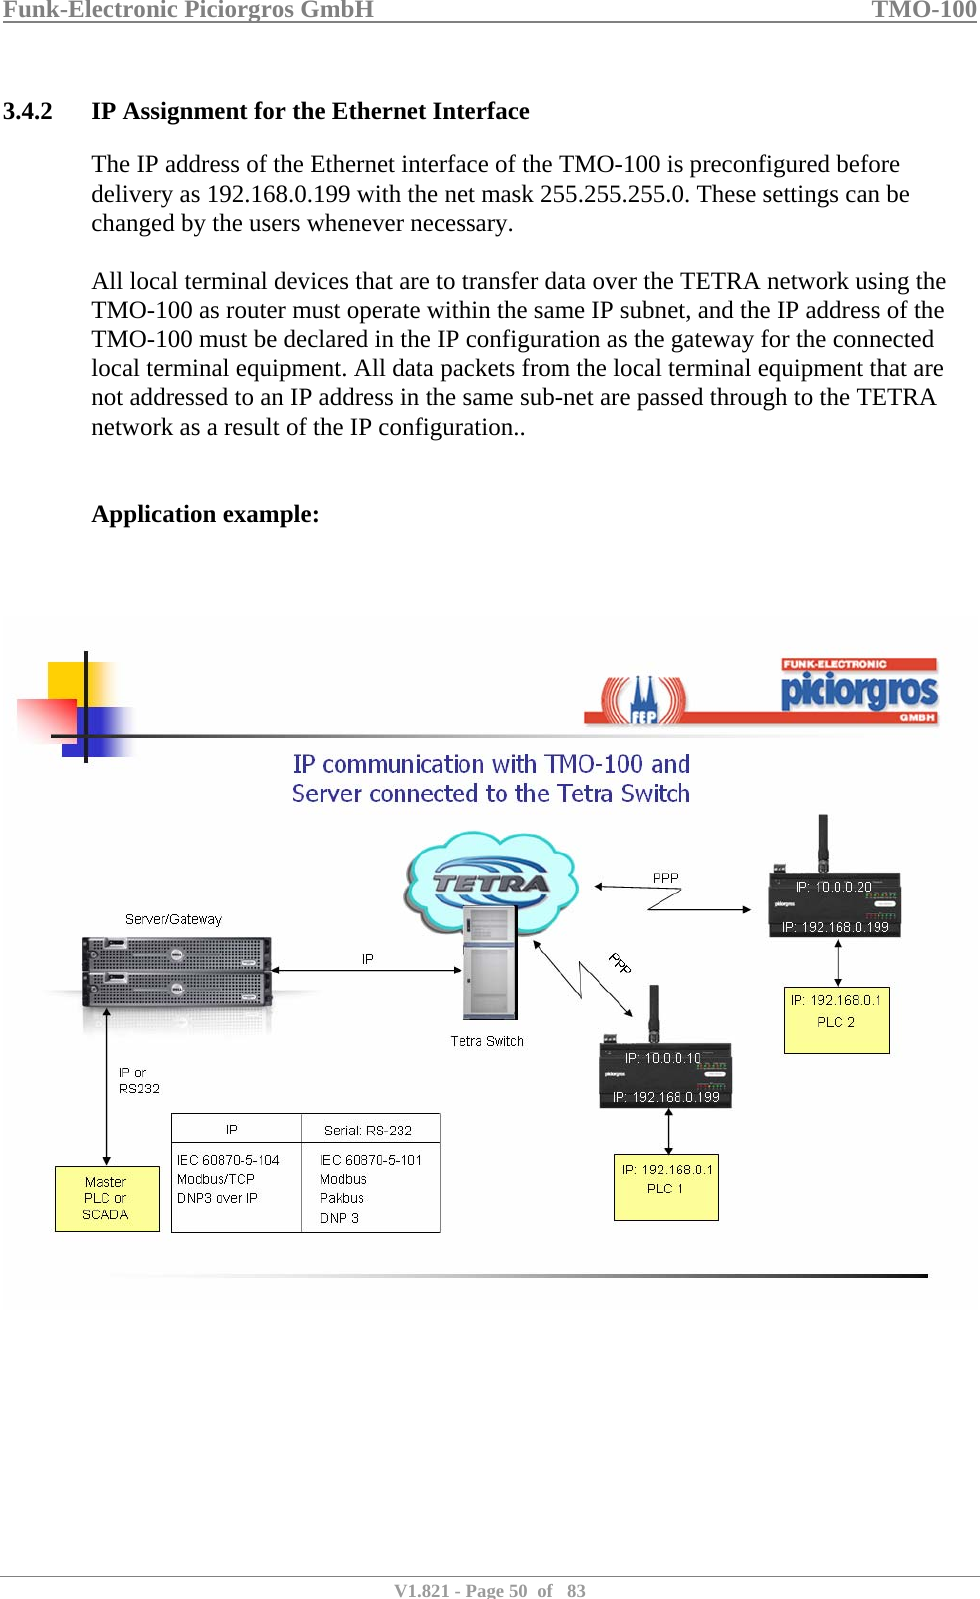 Funk-Electronic Piciorgros GmbH   TMO-100   V1.821 - Page 50  of   83   3.4.2 IP Assignment for the Ethernet Interface The IP address of the Ethernet interface of the TMO-100 is preconfigured before delivery as 192.168.0.199 with the net mask 255.255.255.0. These settings can be changed by the users whenever necessary.   All local terminal devices that are to transfer data over the TETRA network using the TMO-100 as router must operate within the same IP subnet, and the IP address of the TMO-100 must be declared in the IP configuration as the gateway for the connected local terminal equipment. All data packets from the local terminal equipment that are not addressed to an IP address in the same sub-net are passed through to the TETRA network as a result of the IP configuration..   Application example:      